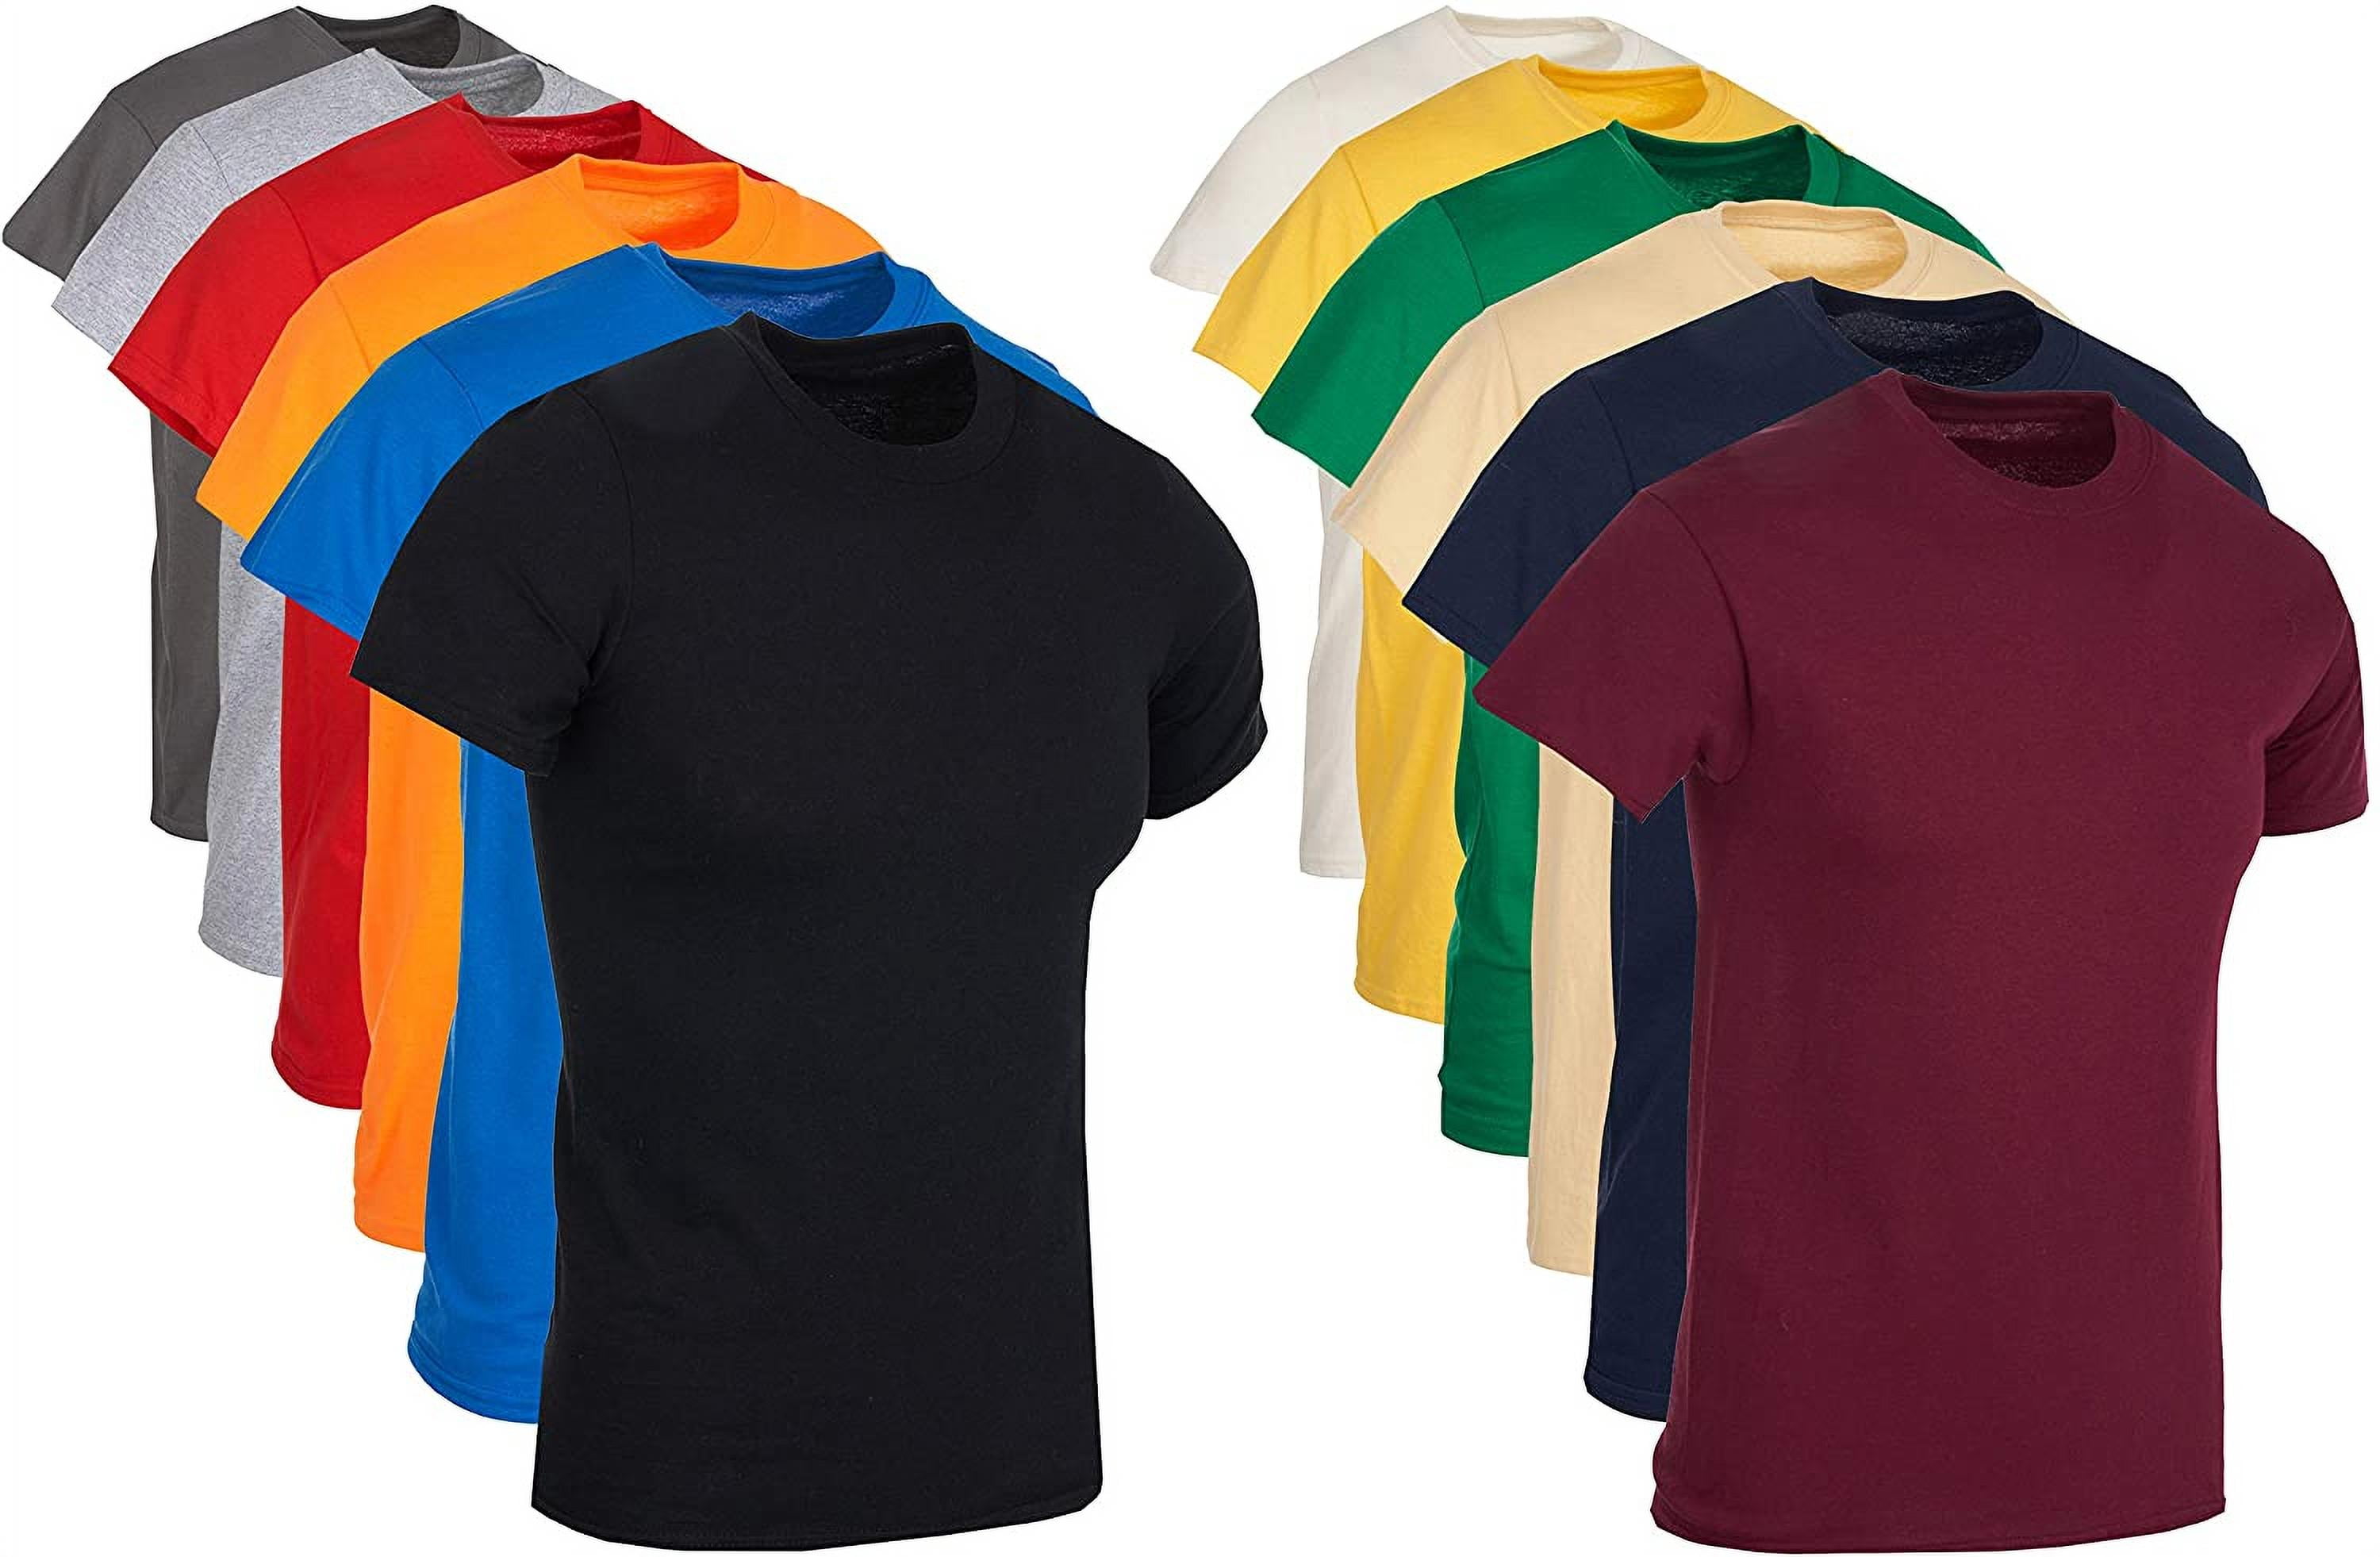 New Fruit Of The Loom Heavy 100% Cotton 36 Piece Black T-shirt Pack Wholesale!! 